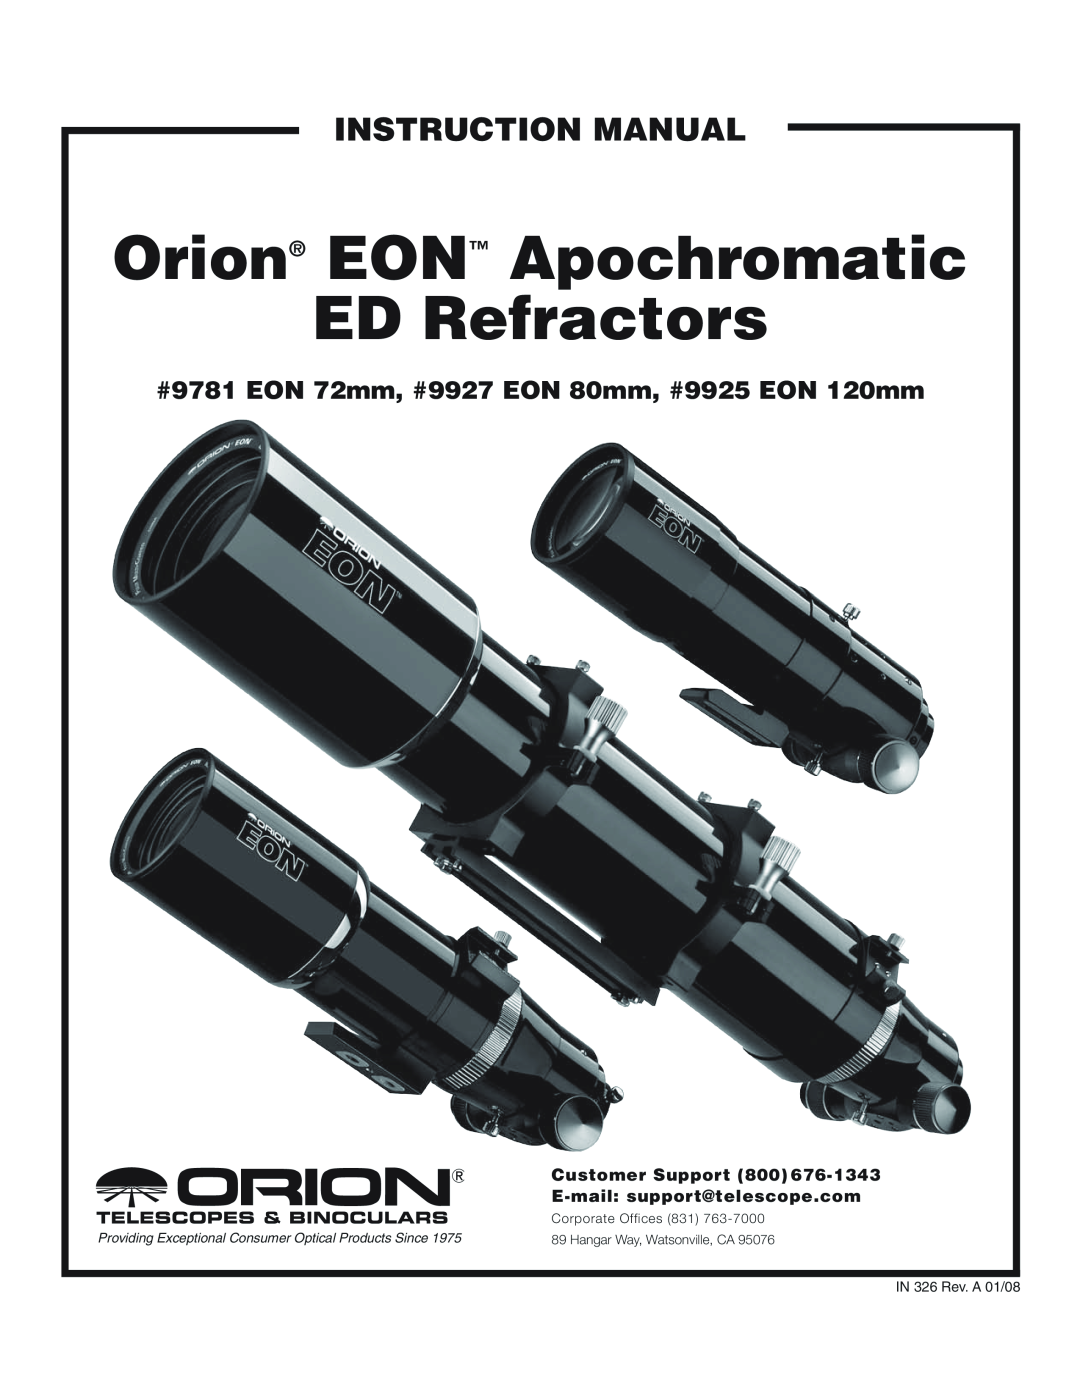 Orion #9781 EON 72MM instruction manual Orion EON, Apochromatic, ED Refractors, Customer Support, Corporate Offices 